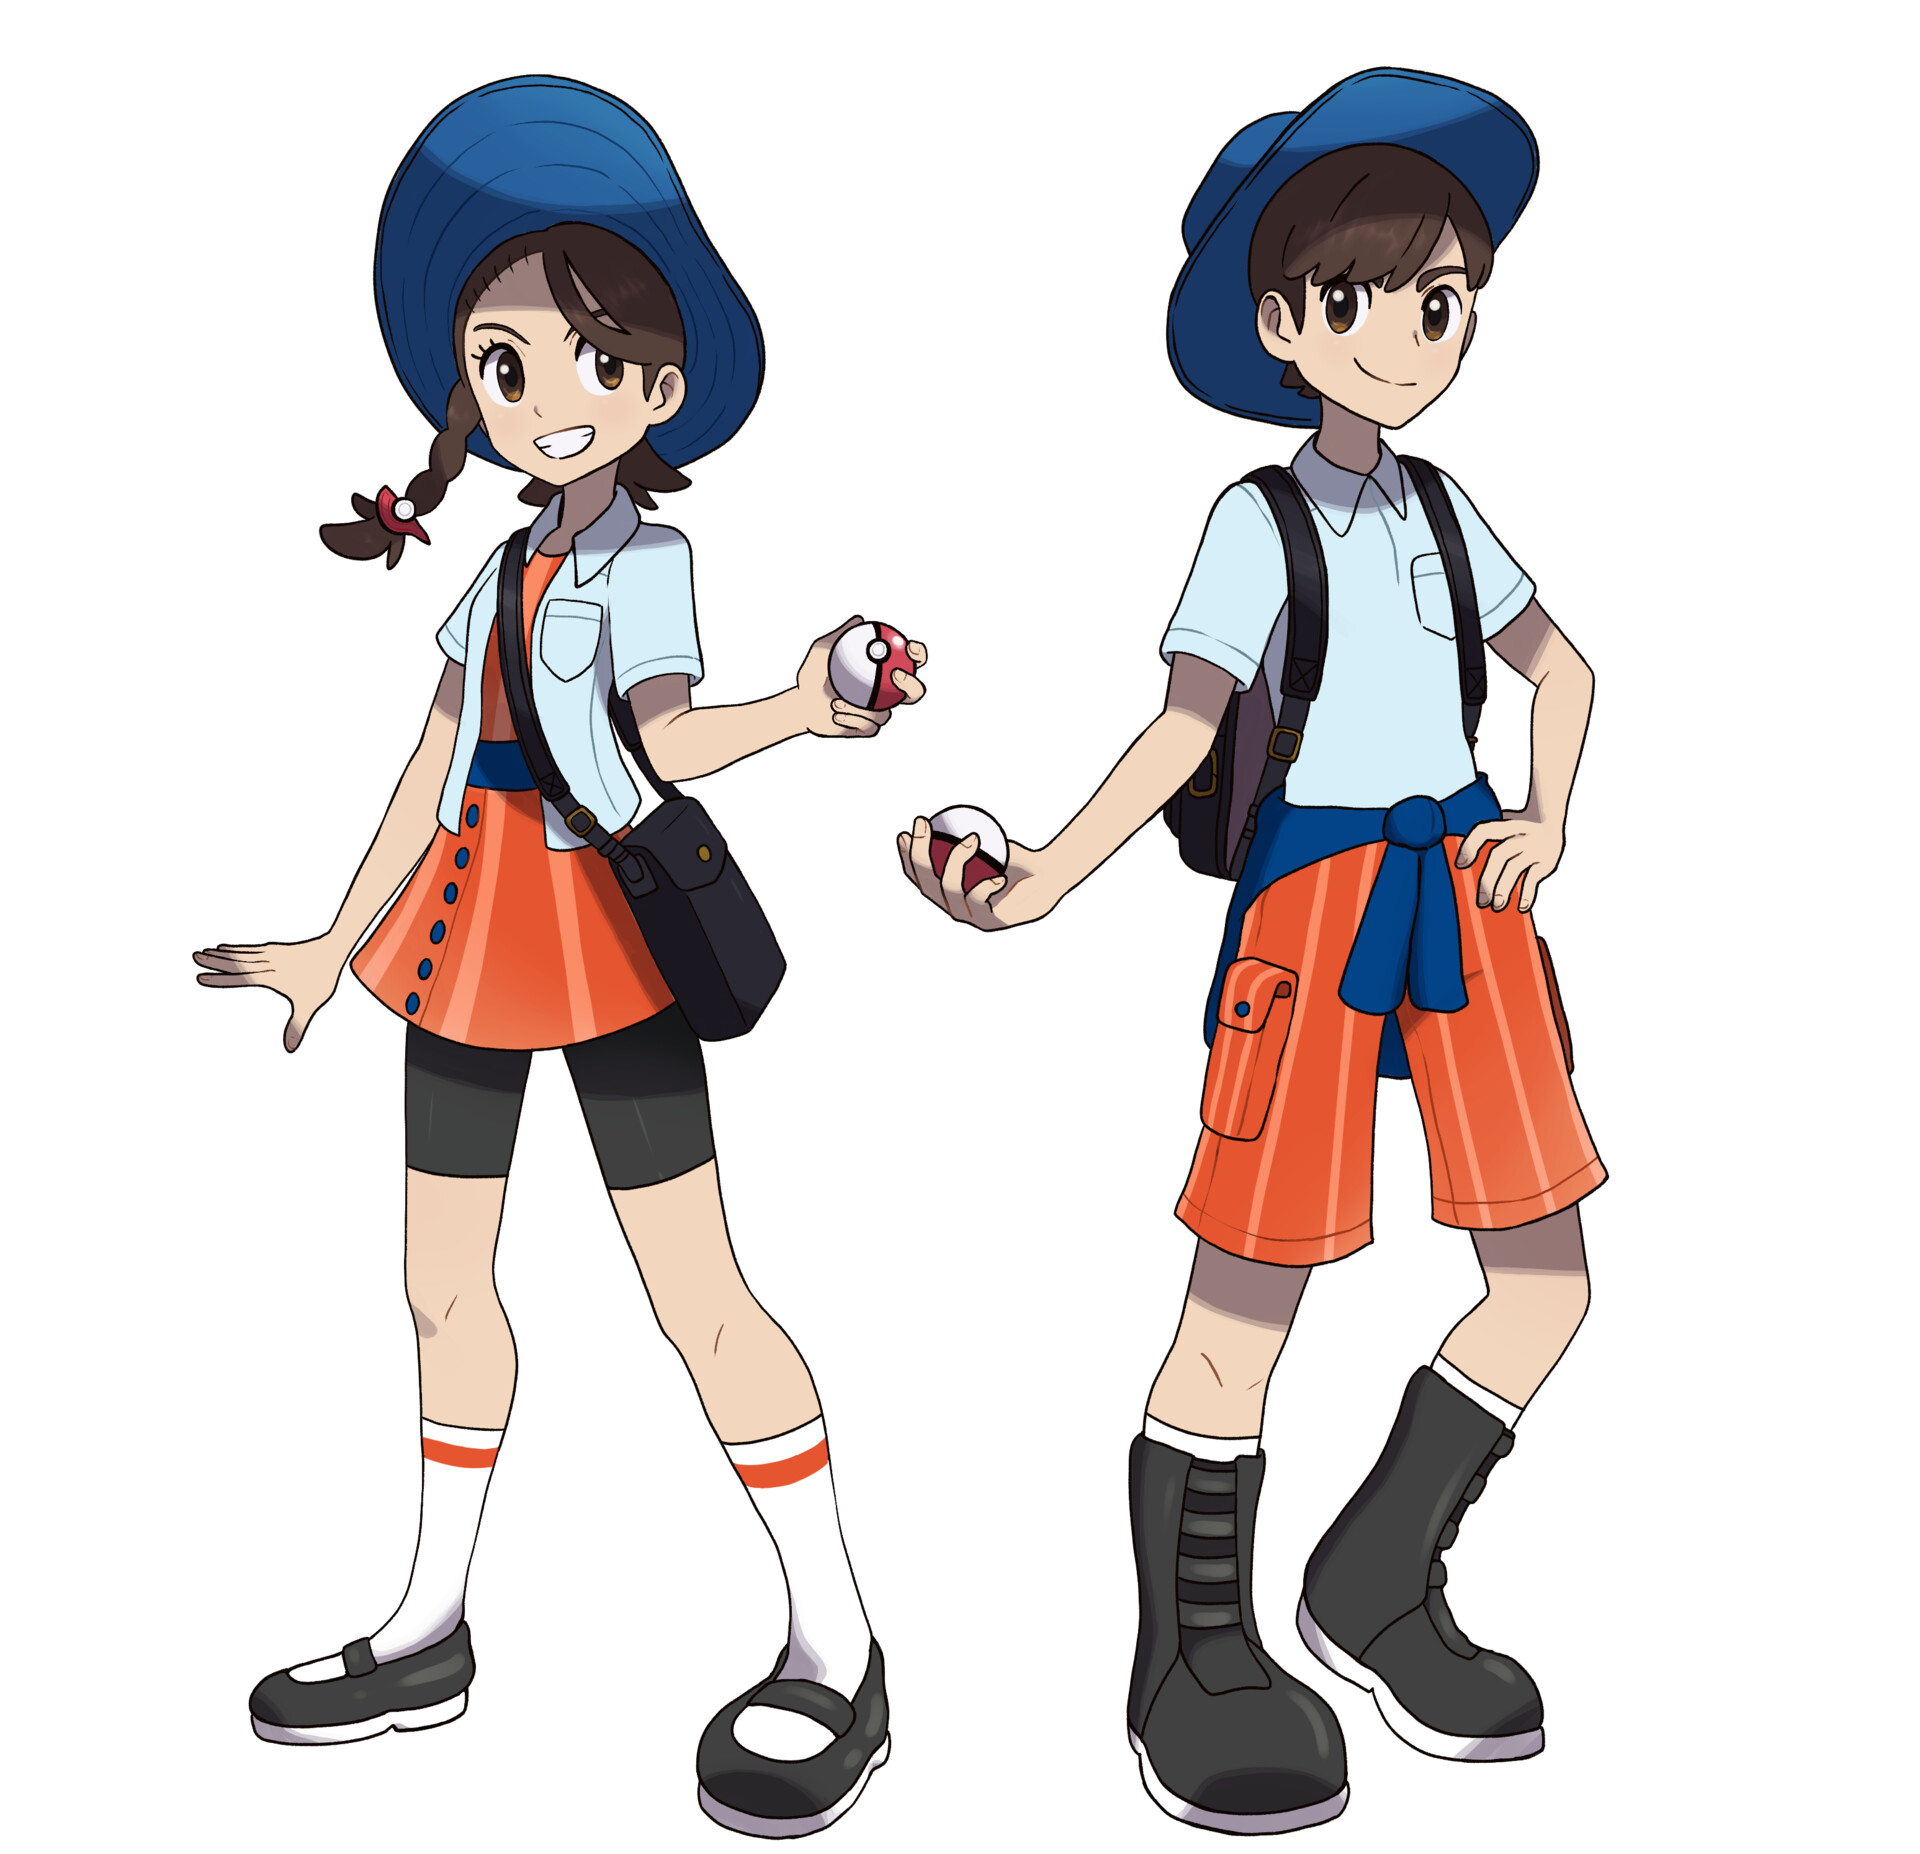 ArtStation - Pokemon Scarlet and Violet Character redesigns